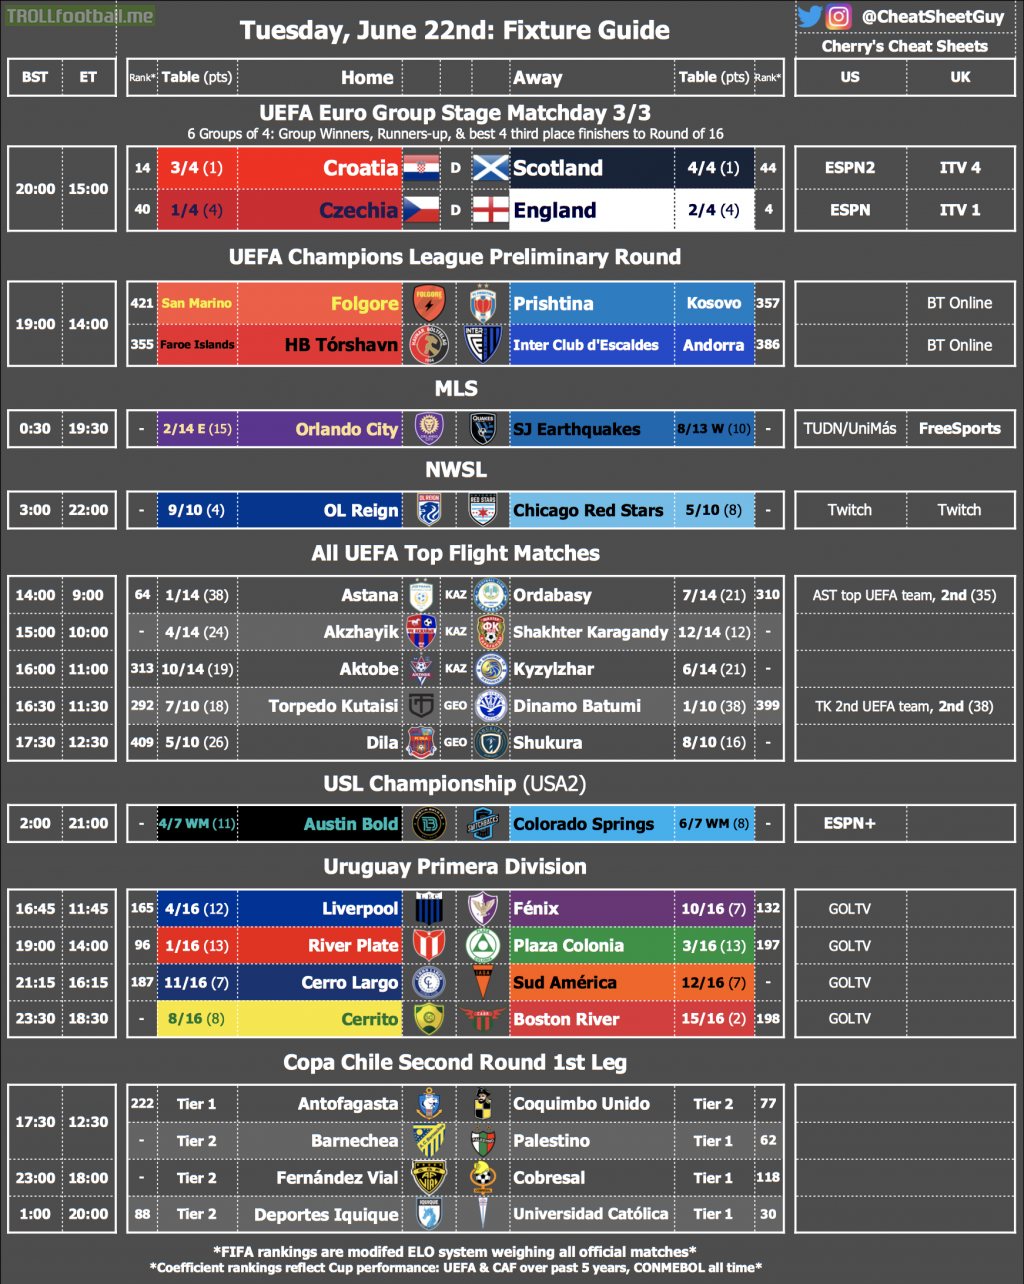 Fixture Cheat Sheet & TV Schedule for Tuesday